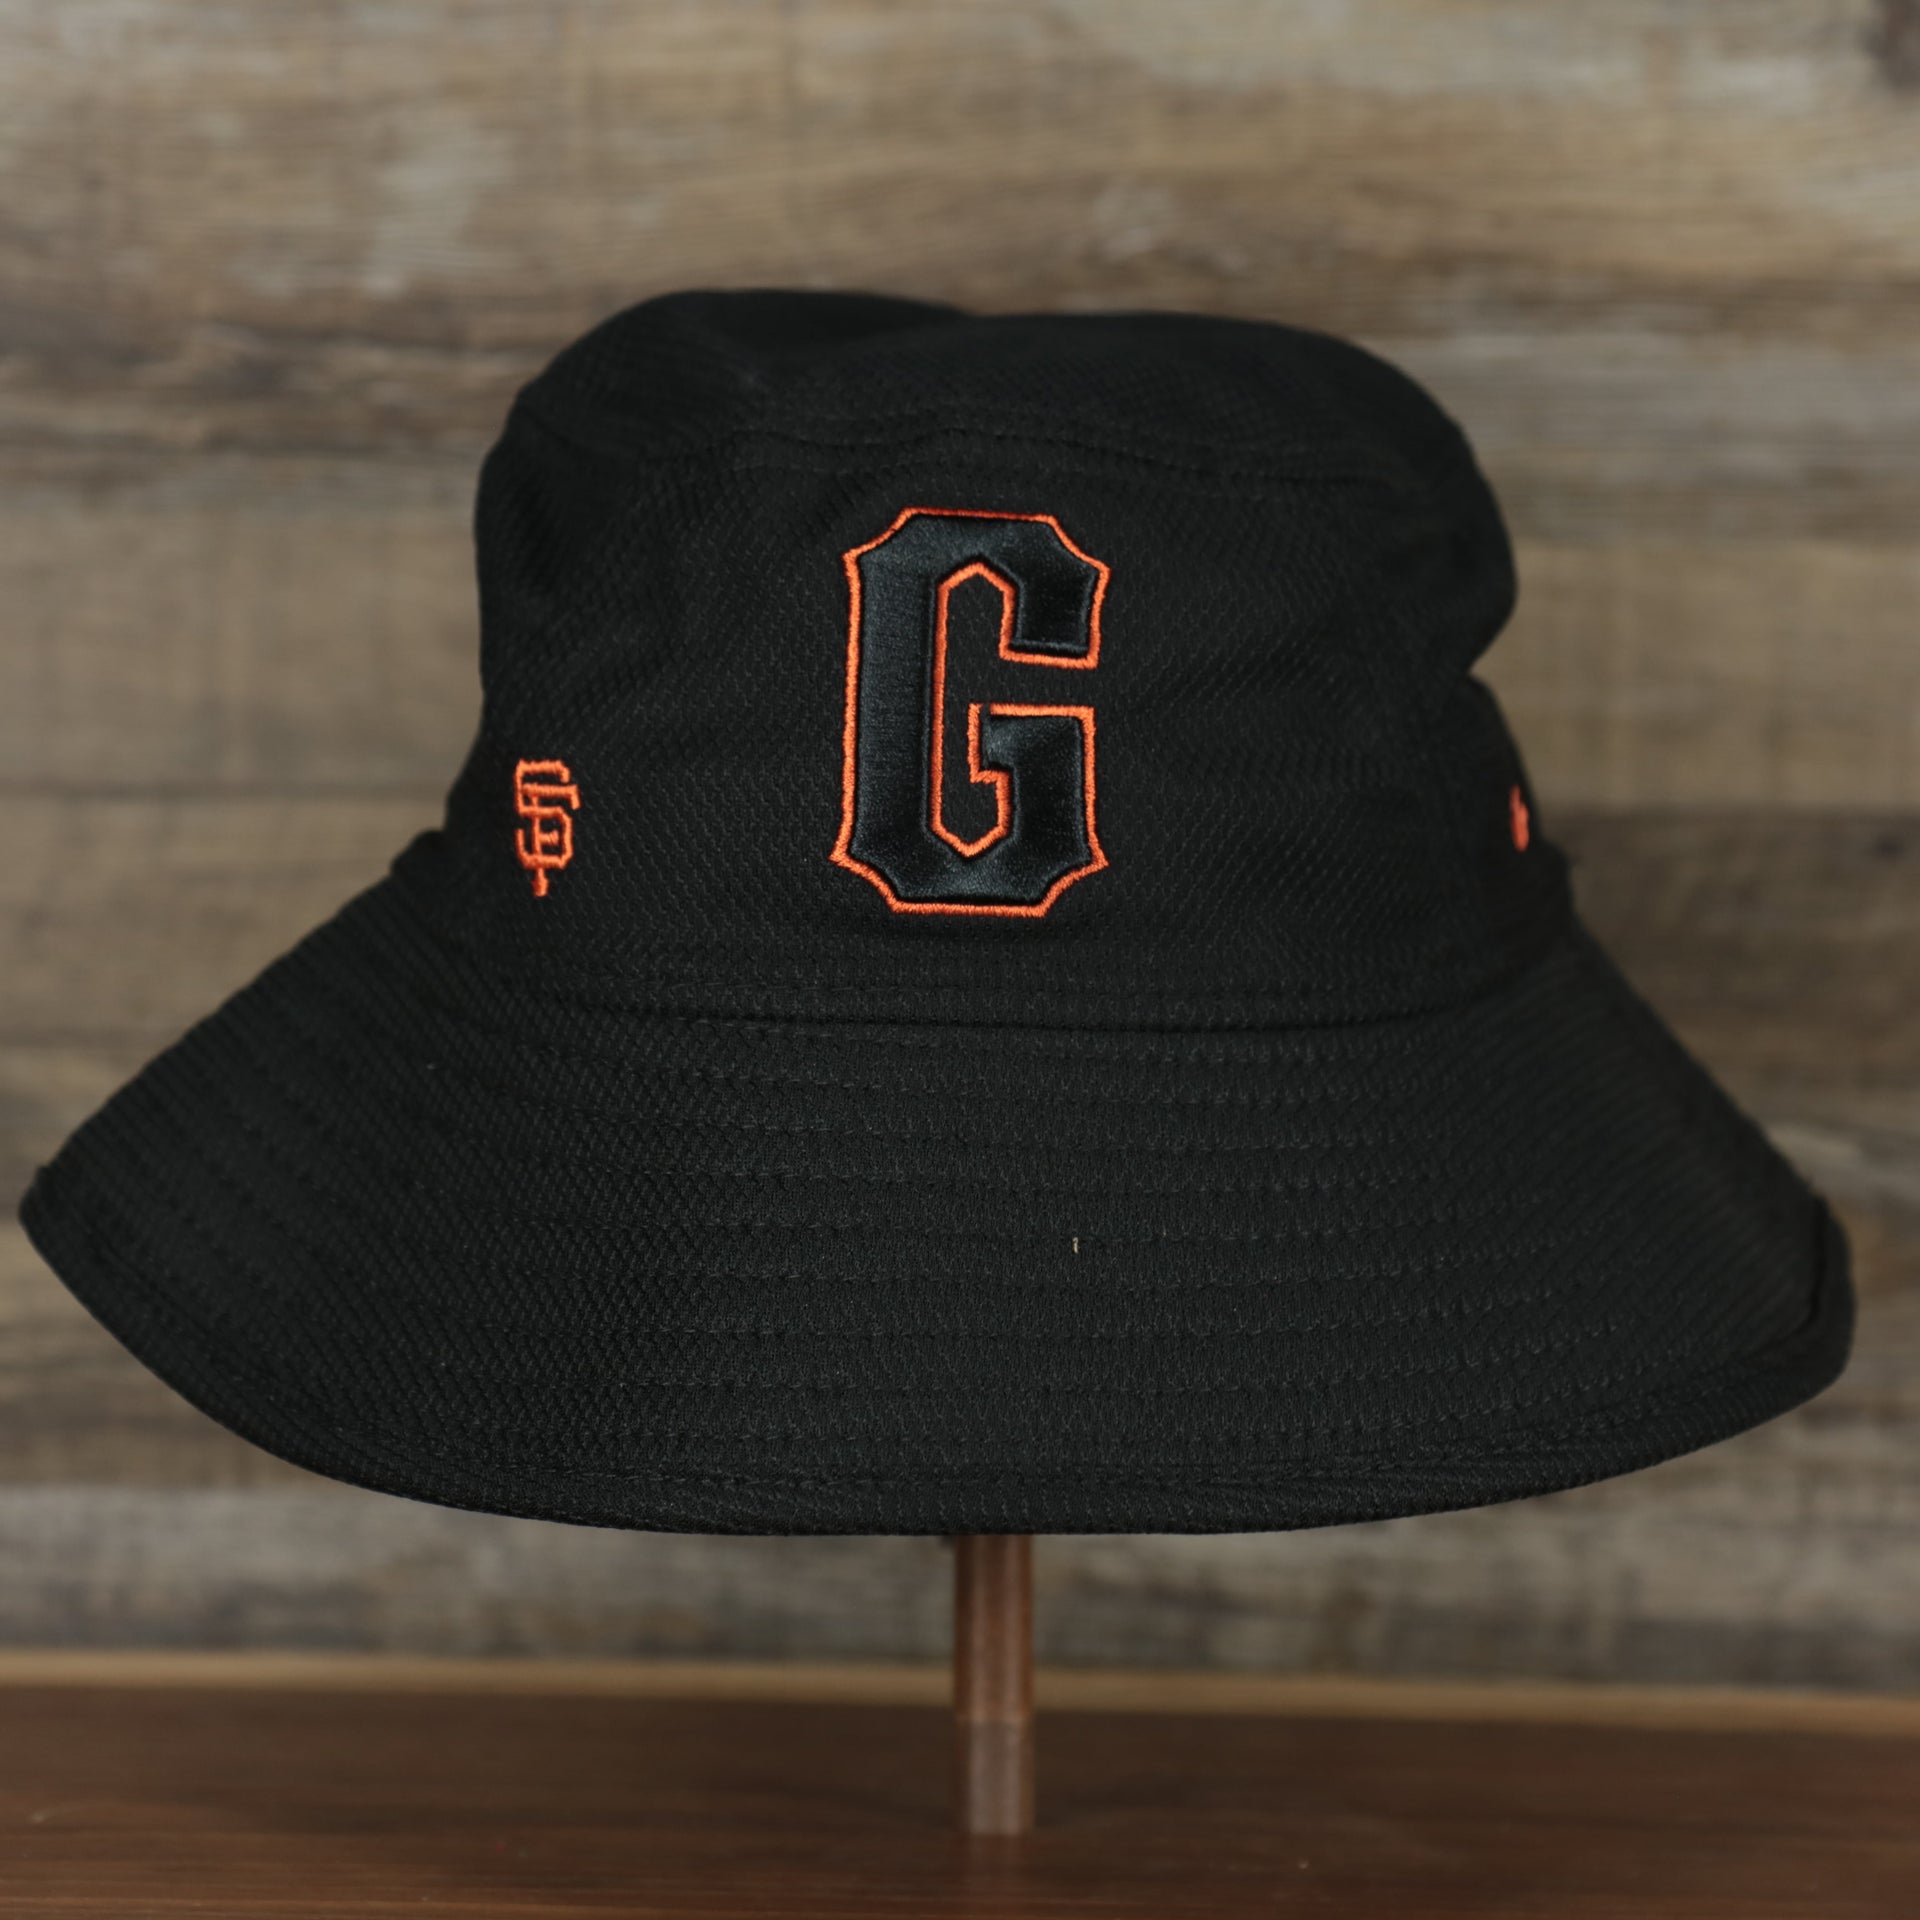 The San Francisco Giants MLB 2022 Spring Training Onfield Bucket Hat